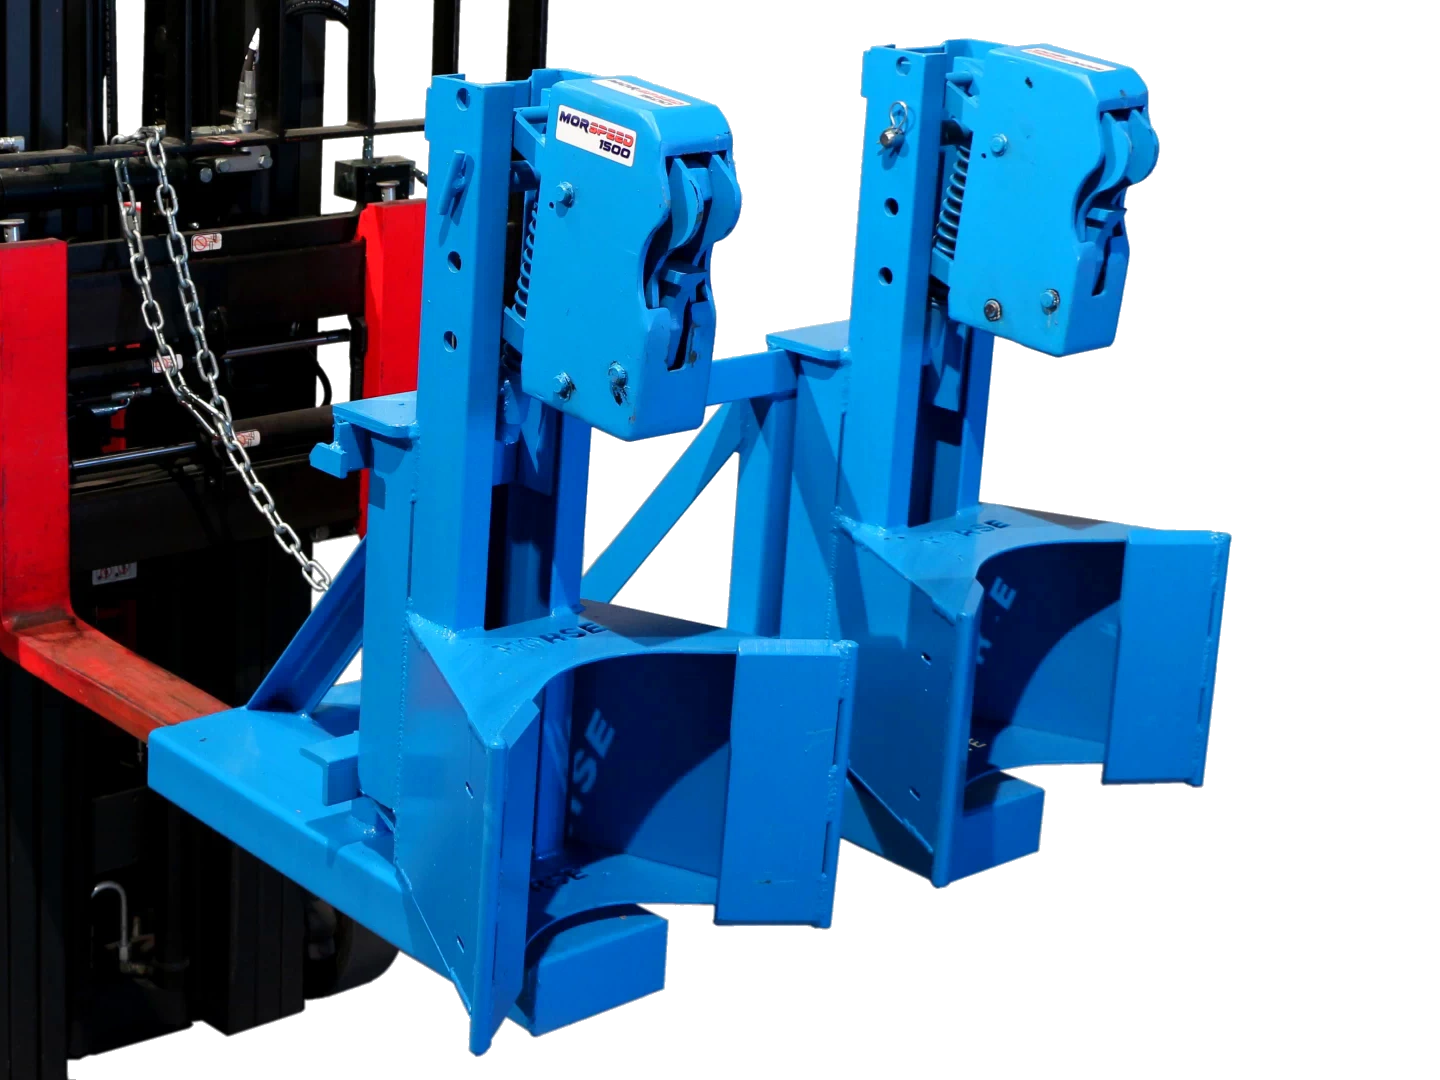 Model 288-2 to handle 1 or 2 rimmed drums at a time. MORSPEED Forklift drum lifter and mover.